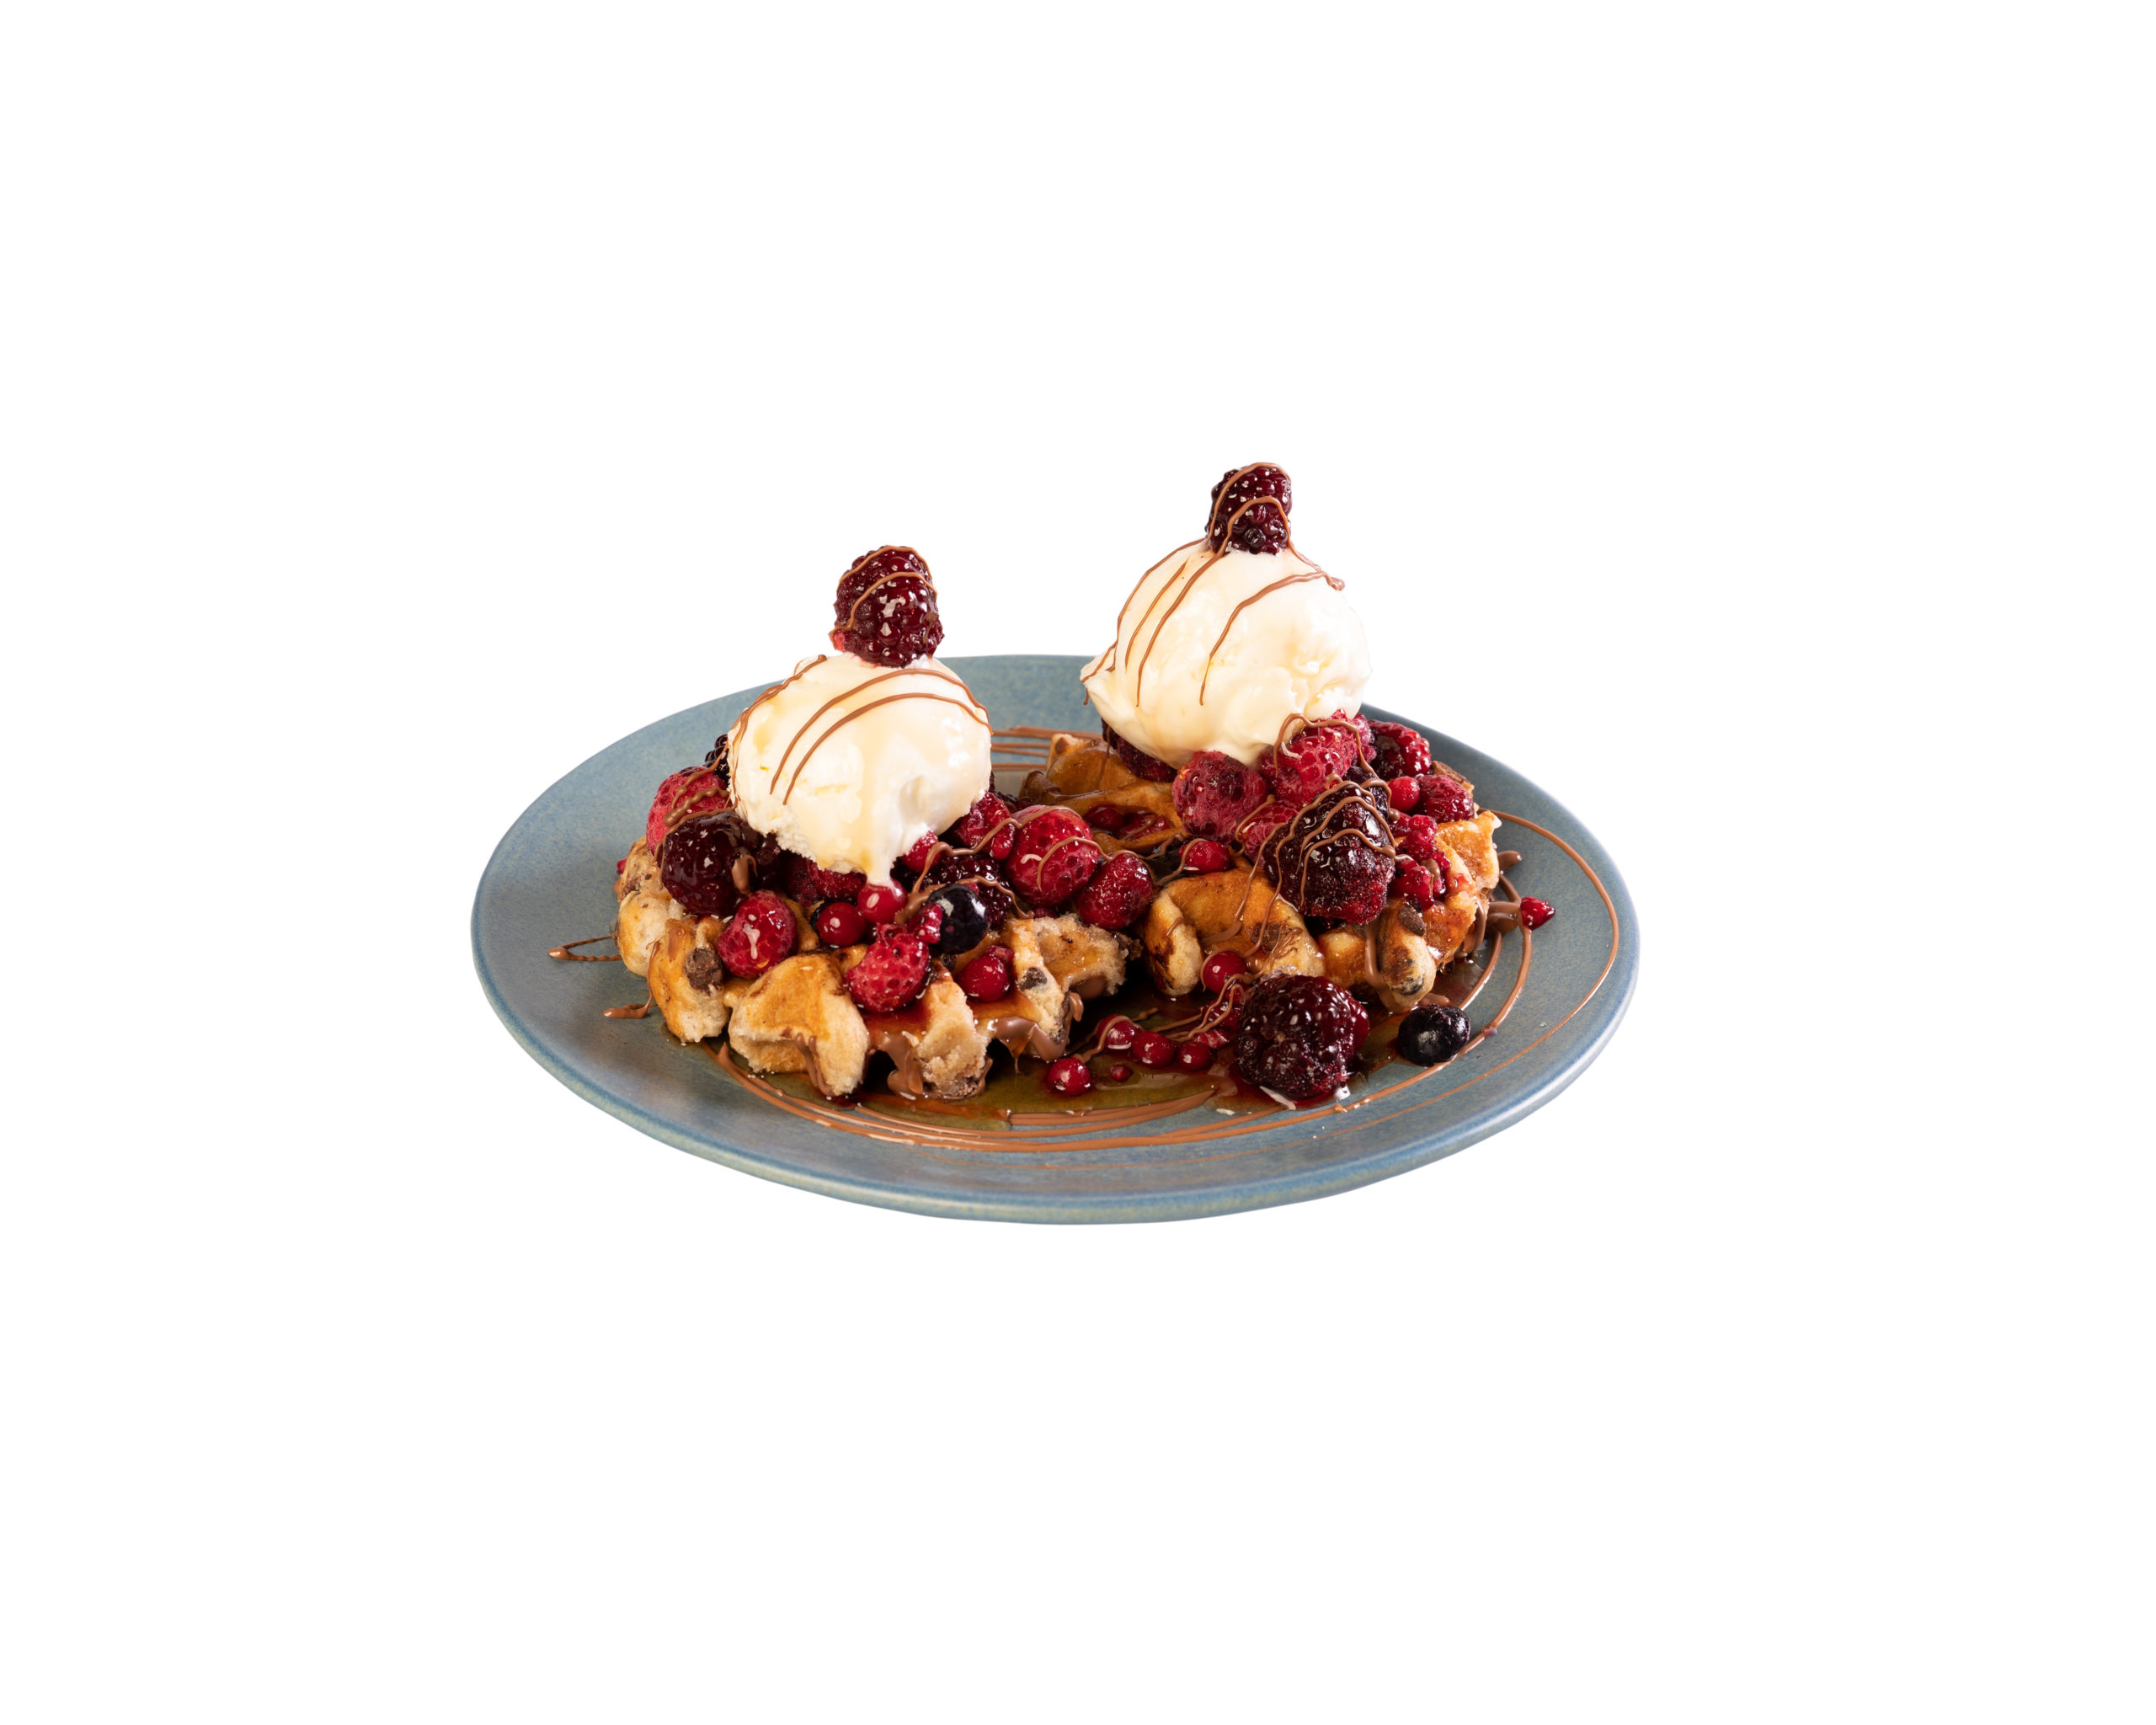 4. Mixed Berry Waffle for 2